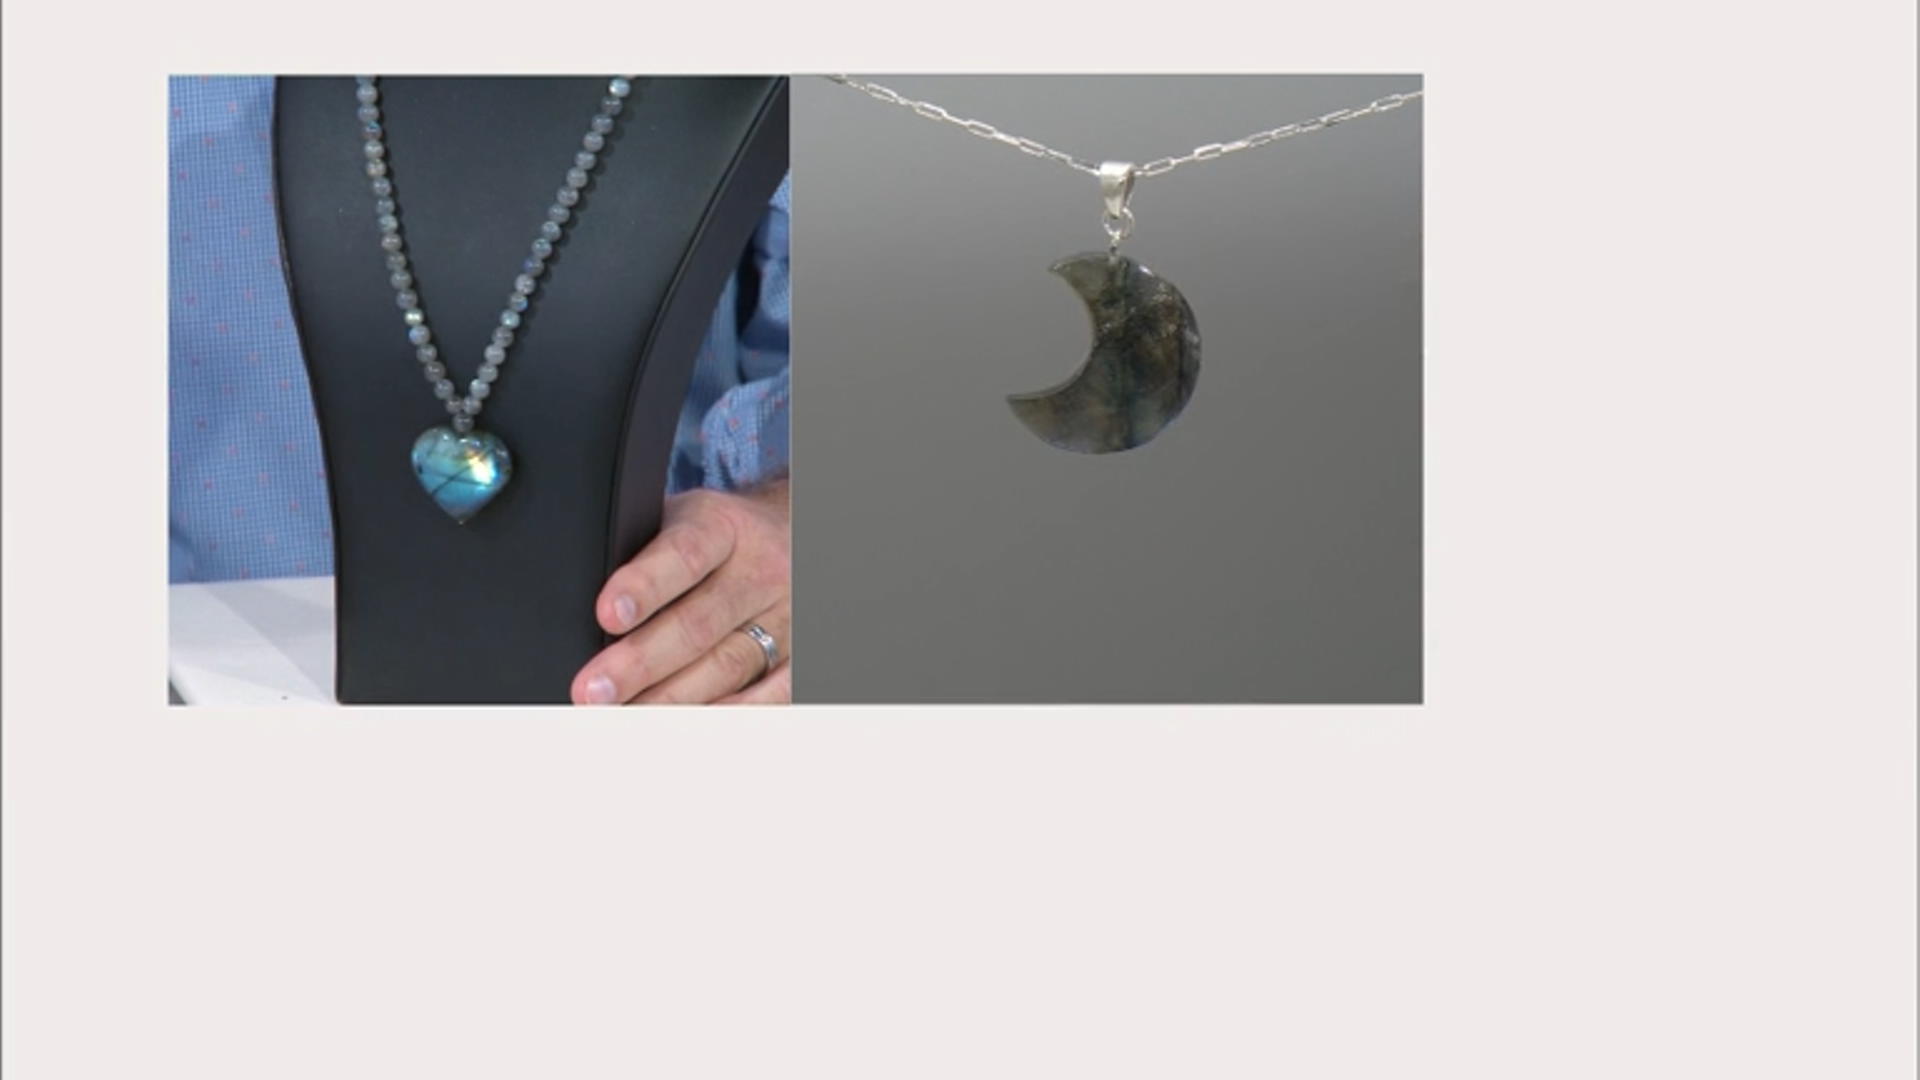 Grey Labradorite Rhodium Over Sterling Silver Necklace Video Thumbnail